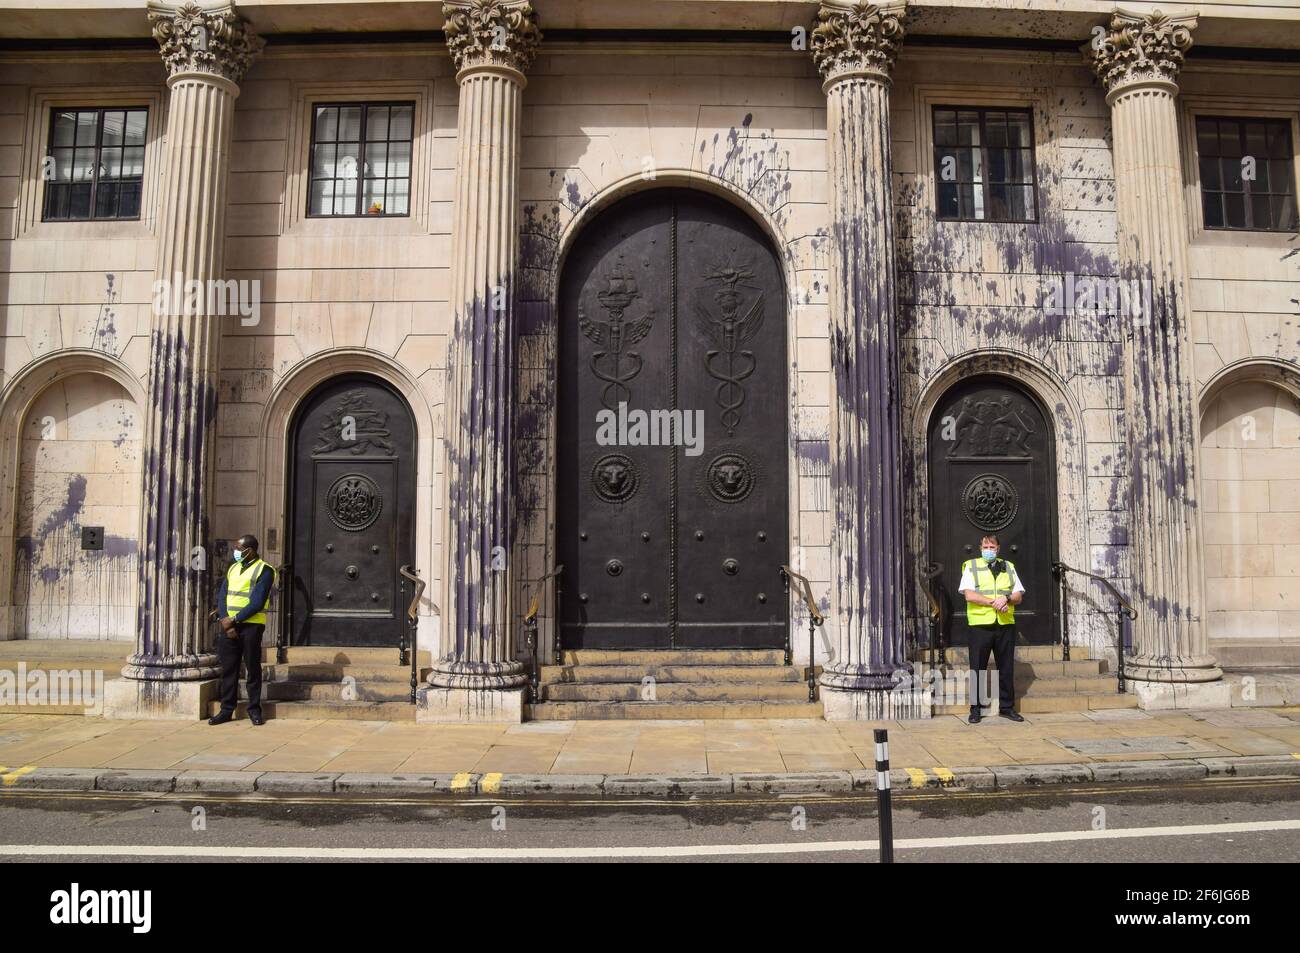 London, United Kingdom. 1st April 2021. Extinction Rebellion activists covered the Bank Of England in fake oil as part of nationwide 'Money Rebellion' protests targeting banks over, the activists say, their role in the climate and ecological crisis. Stock Photo